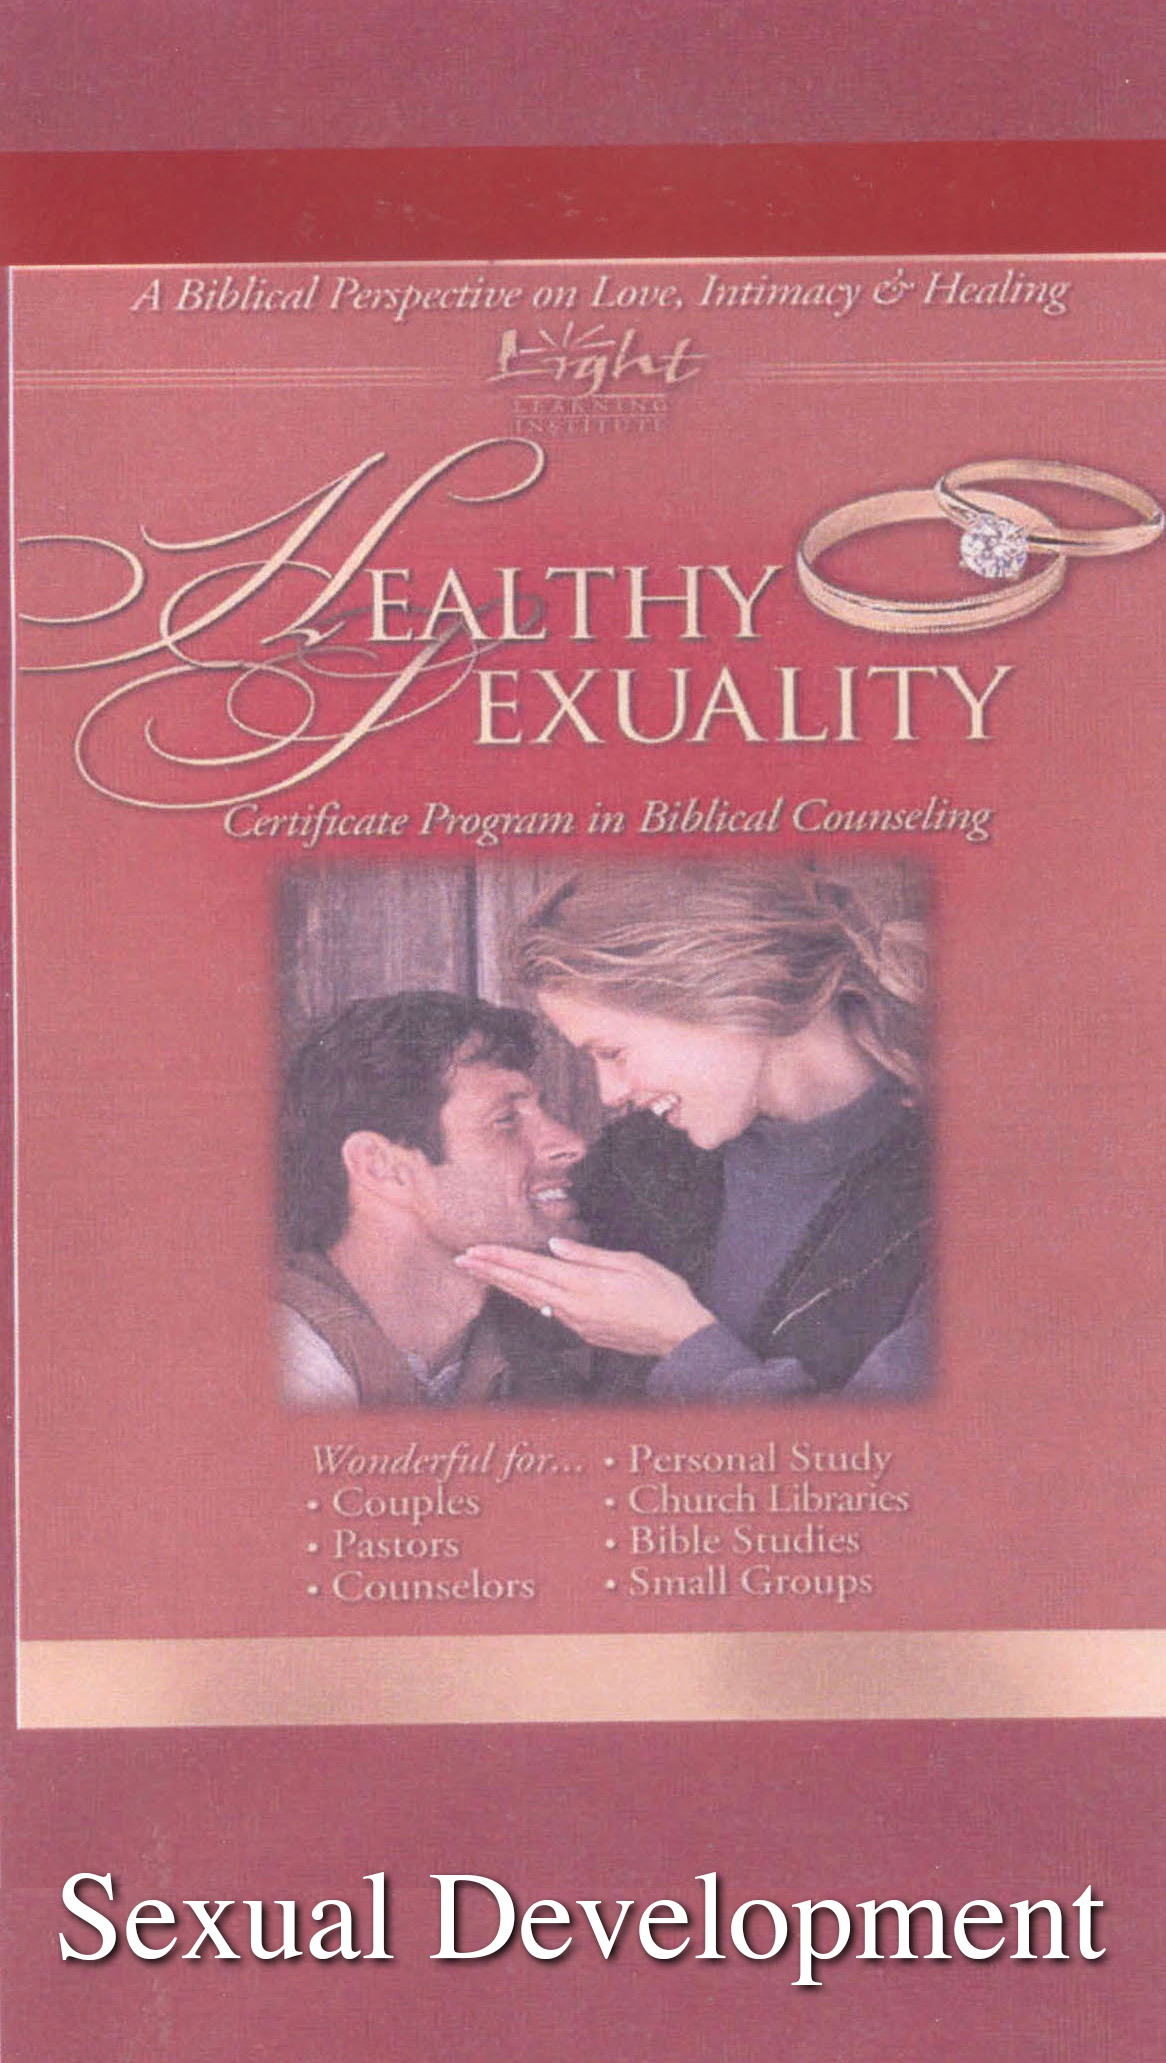 Unhealthy Sexuality 89